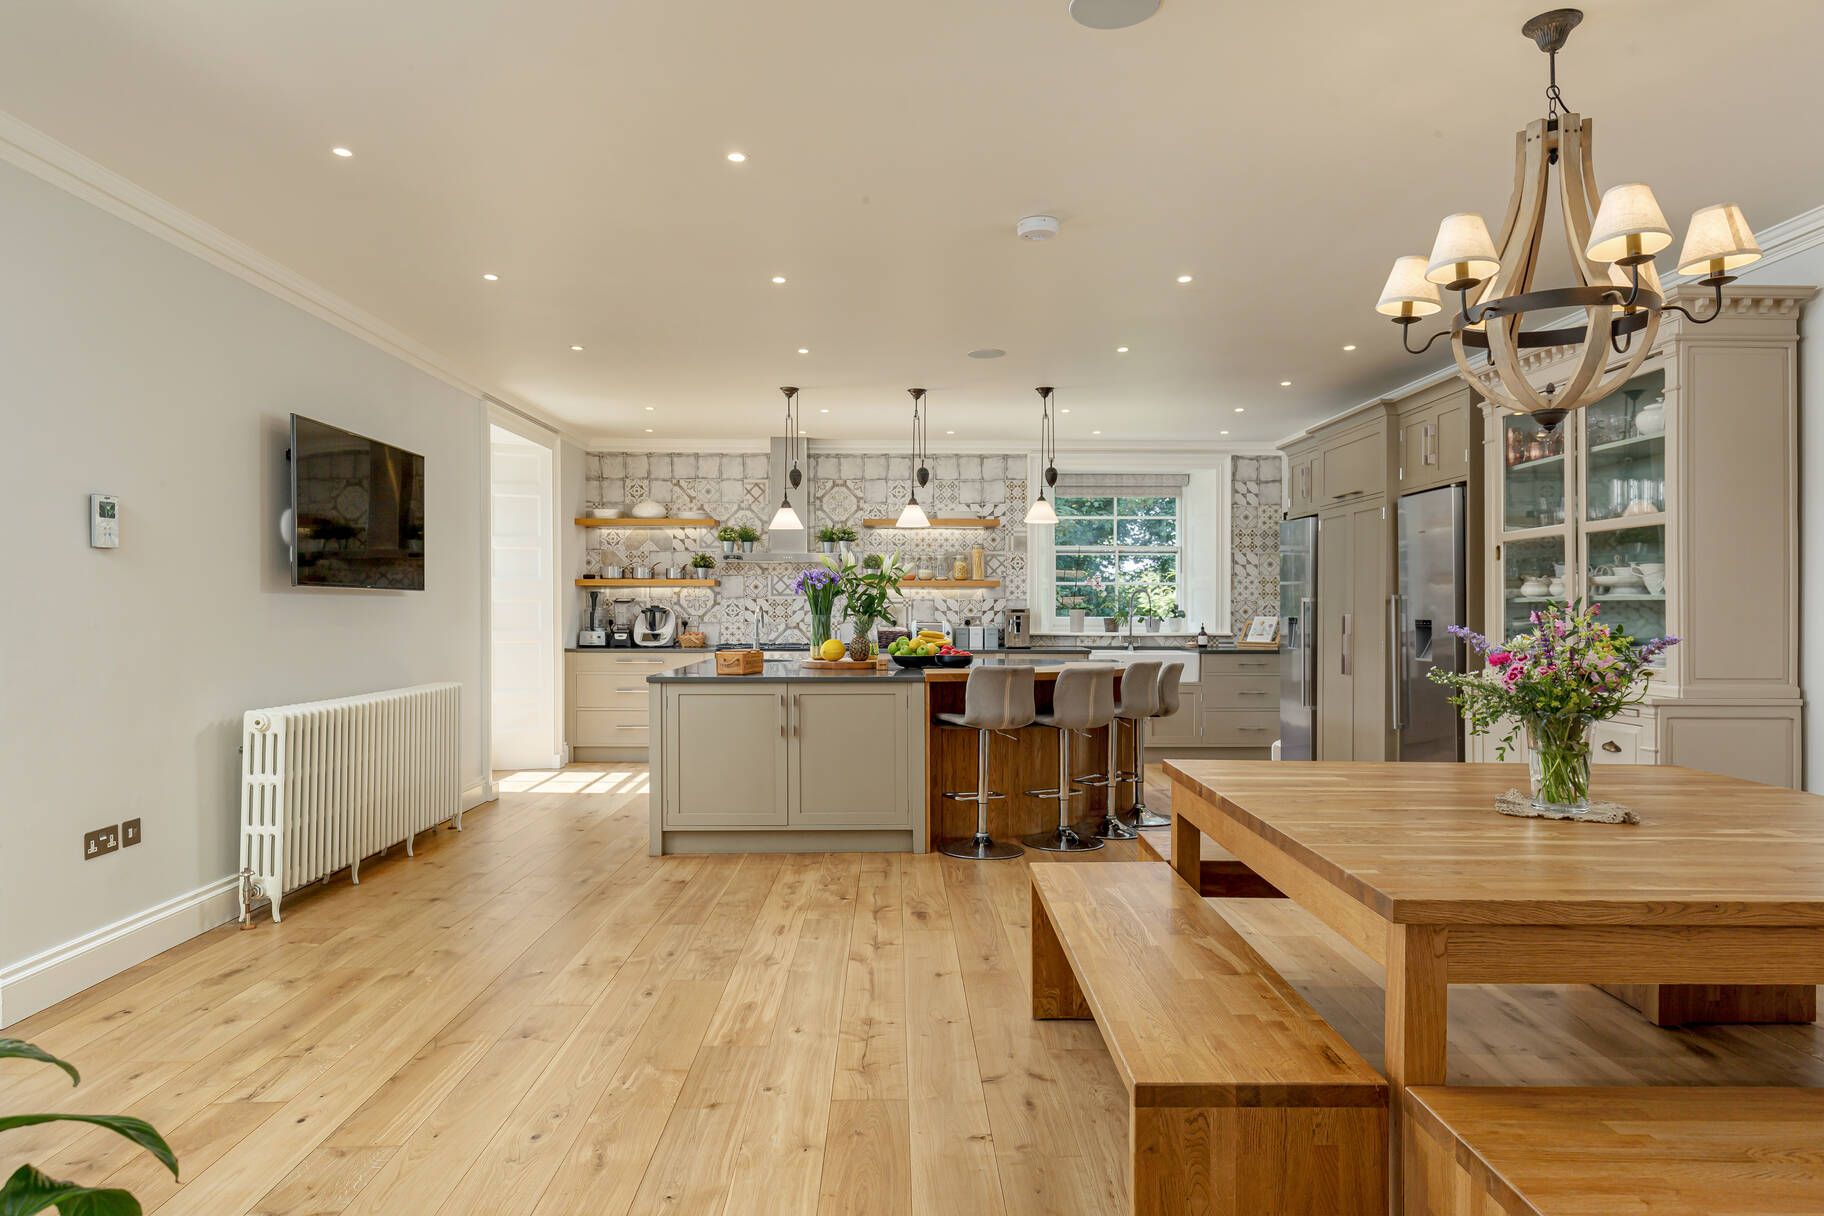 Woodhall House includes a bespoke kitchen designed and handmade by Michael Hart fitted with a large central island and high-spec appliances.